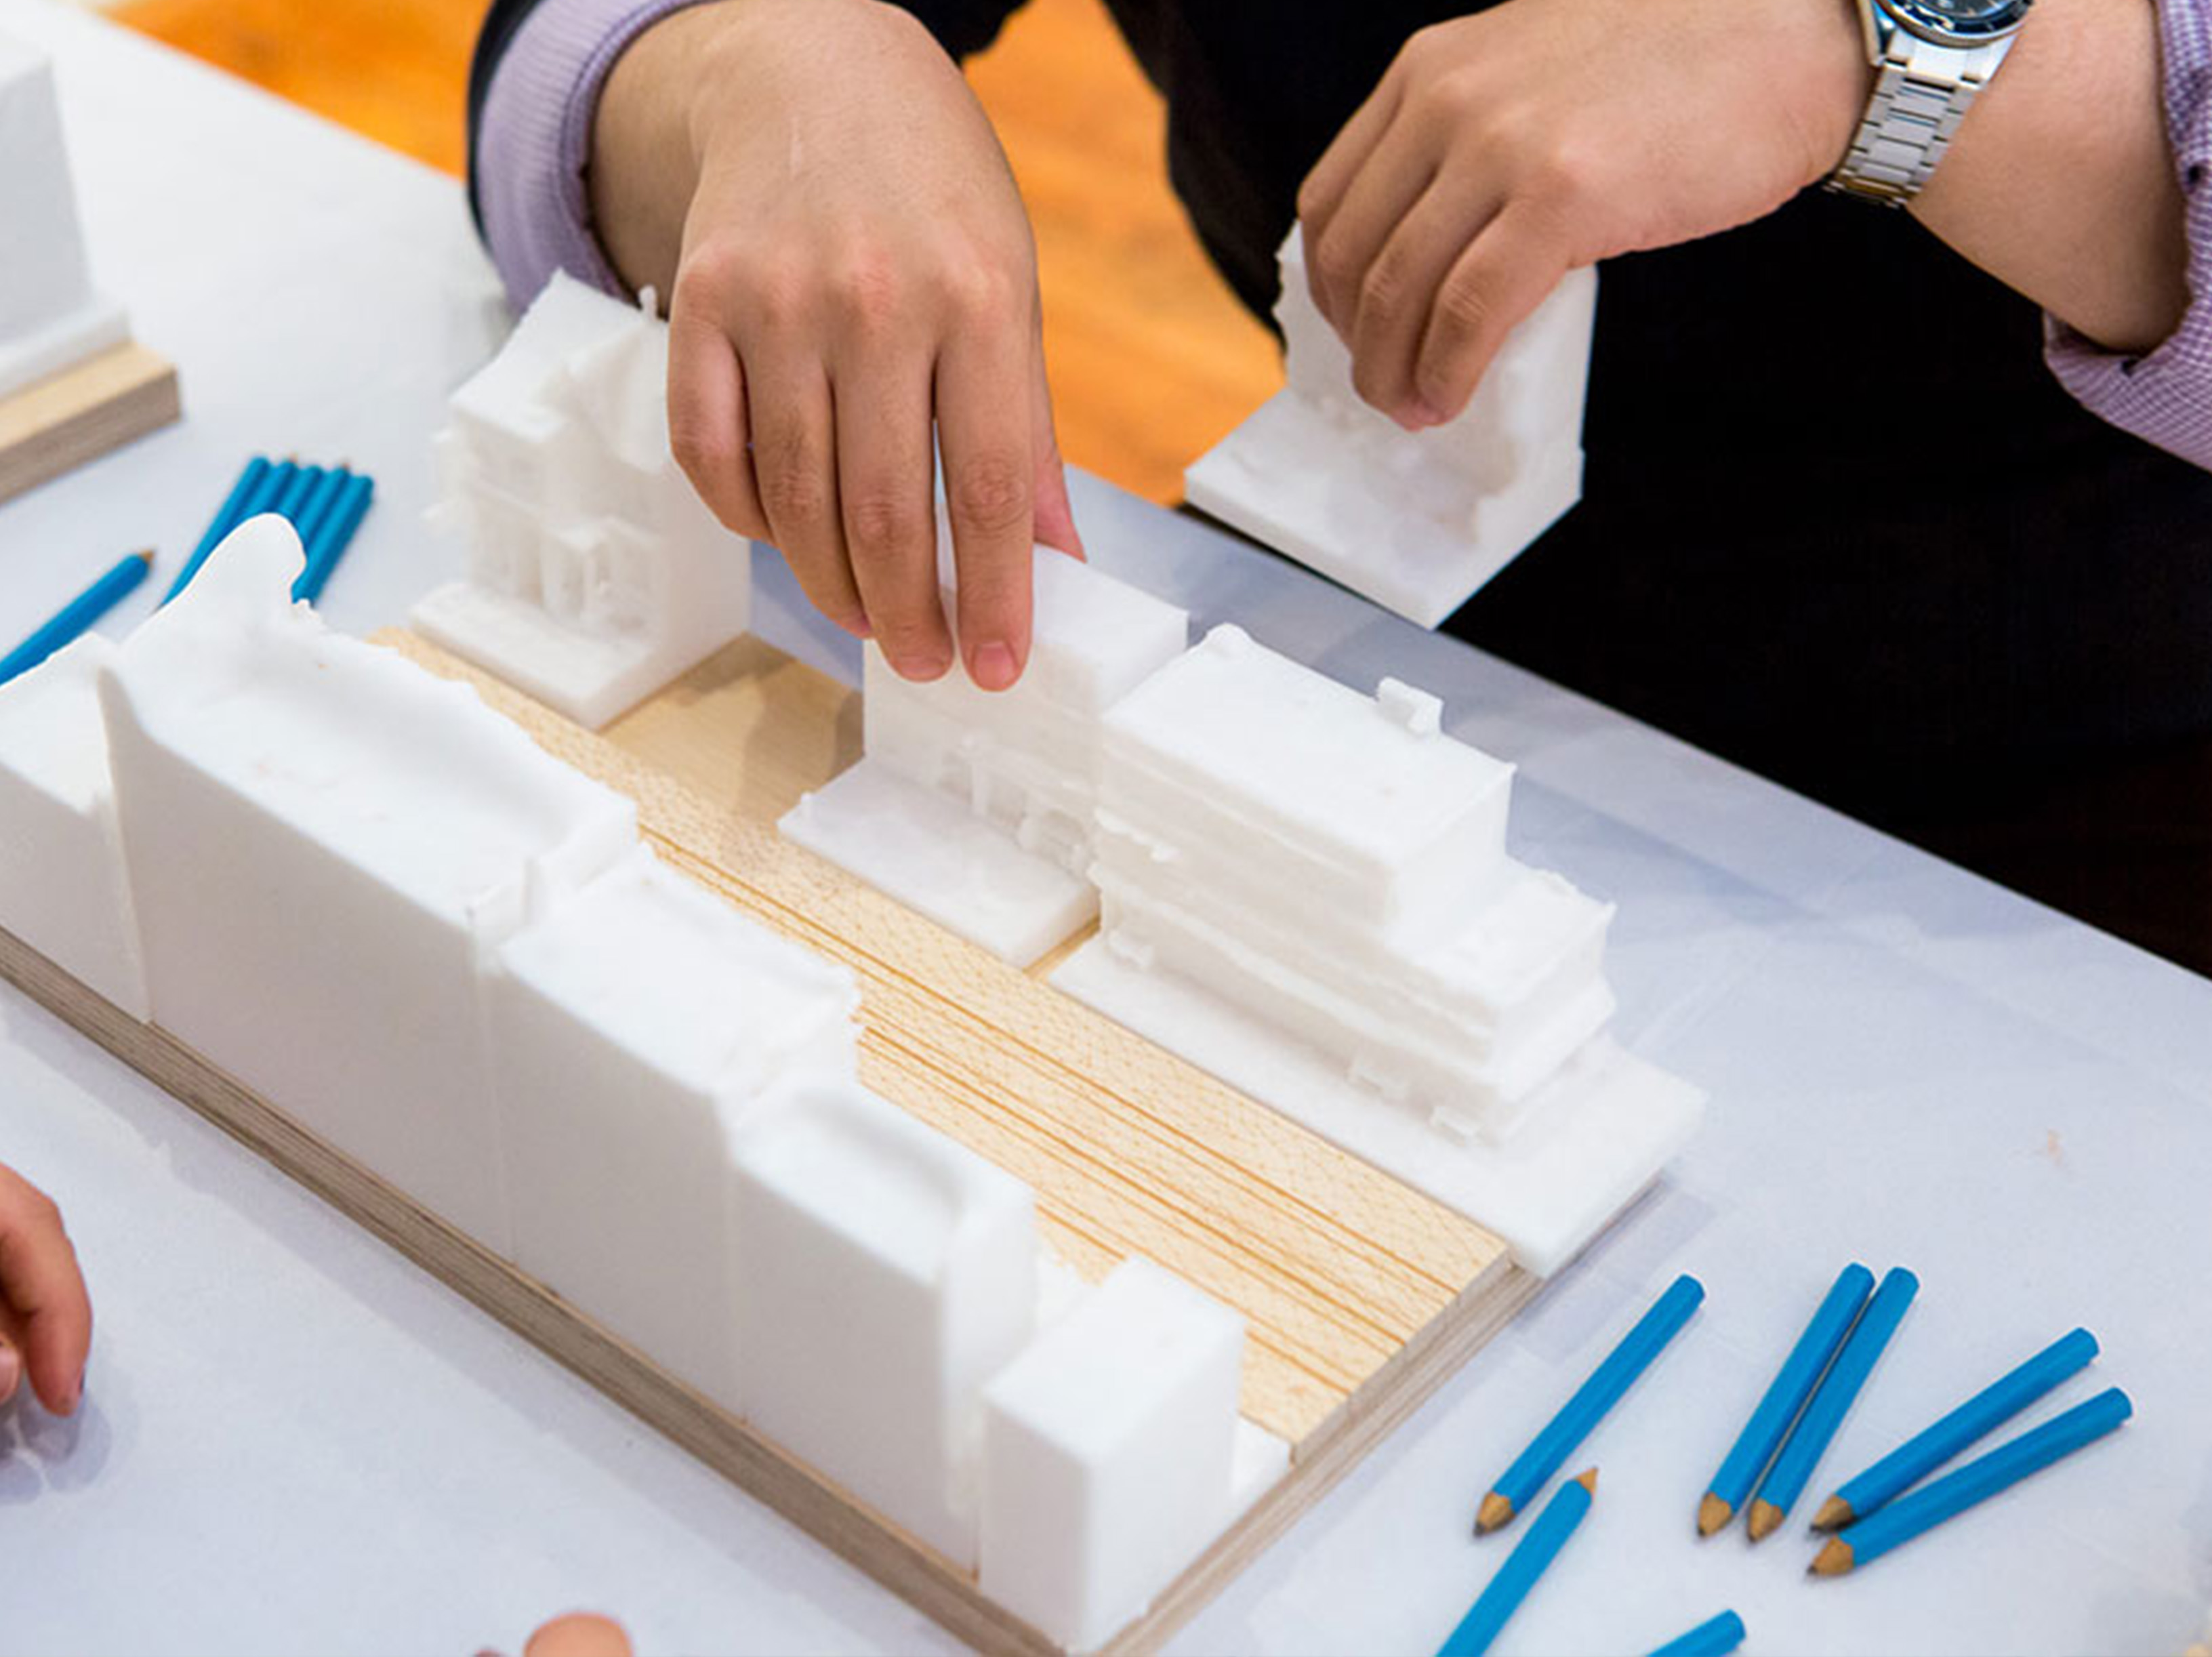 A close-up of hands assembling small white models of houses on a wood platform.